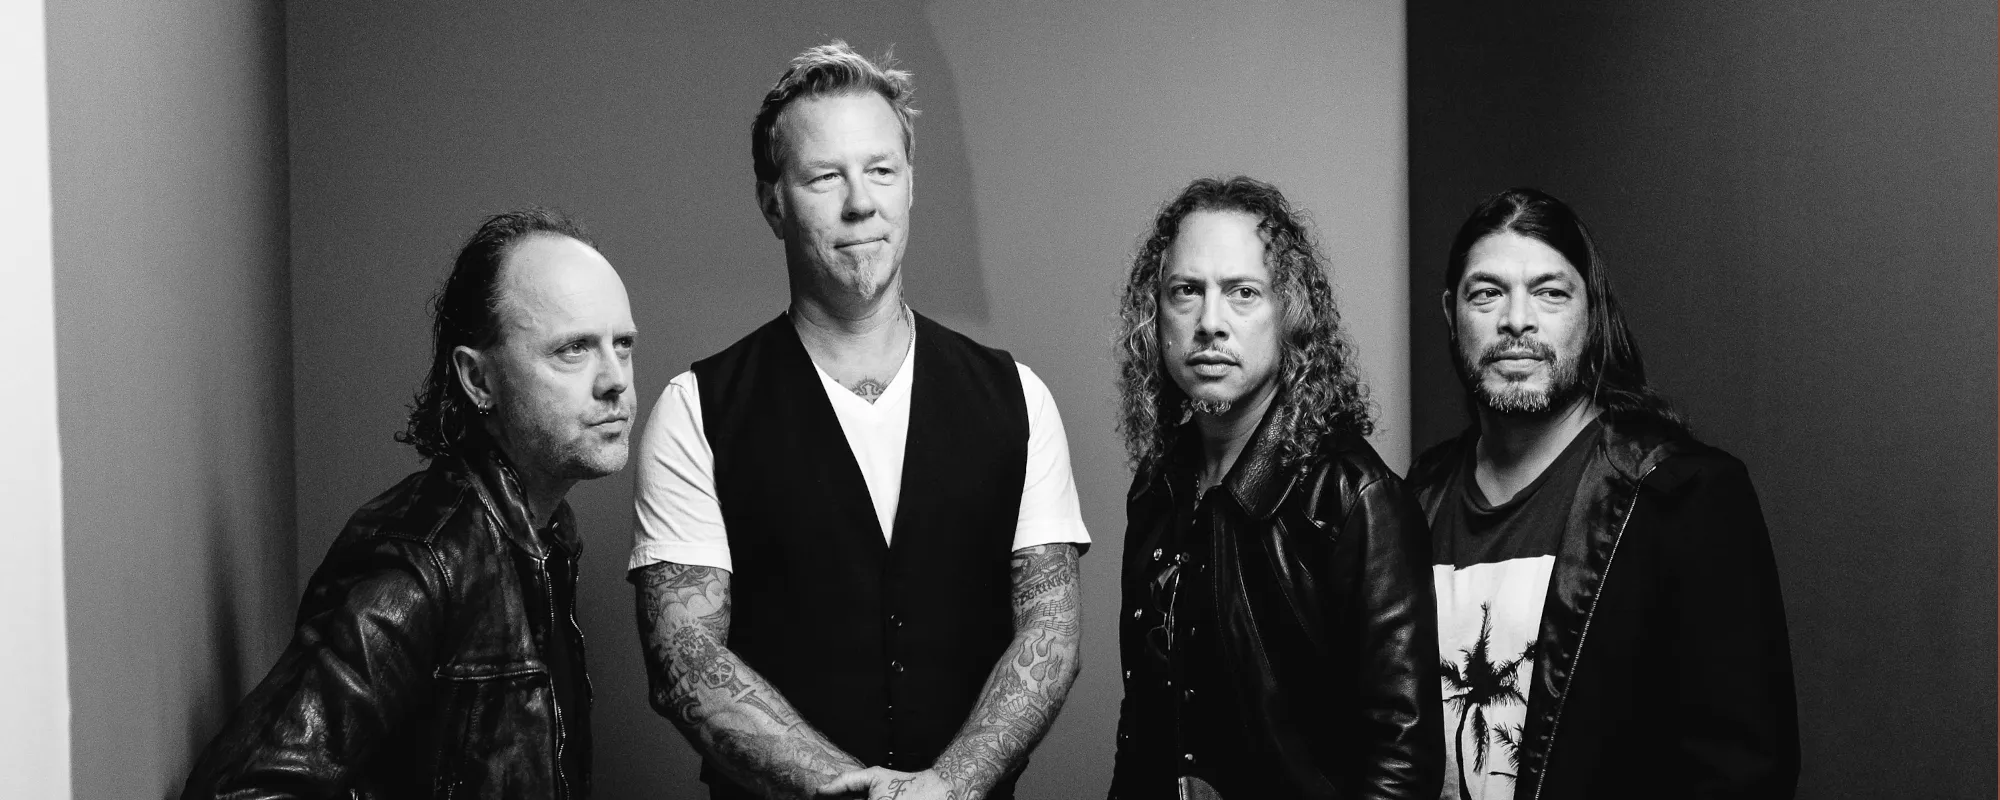 Behind the History and Meaning of the Metallica Song “Enter Sandman”